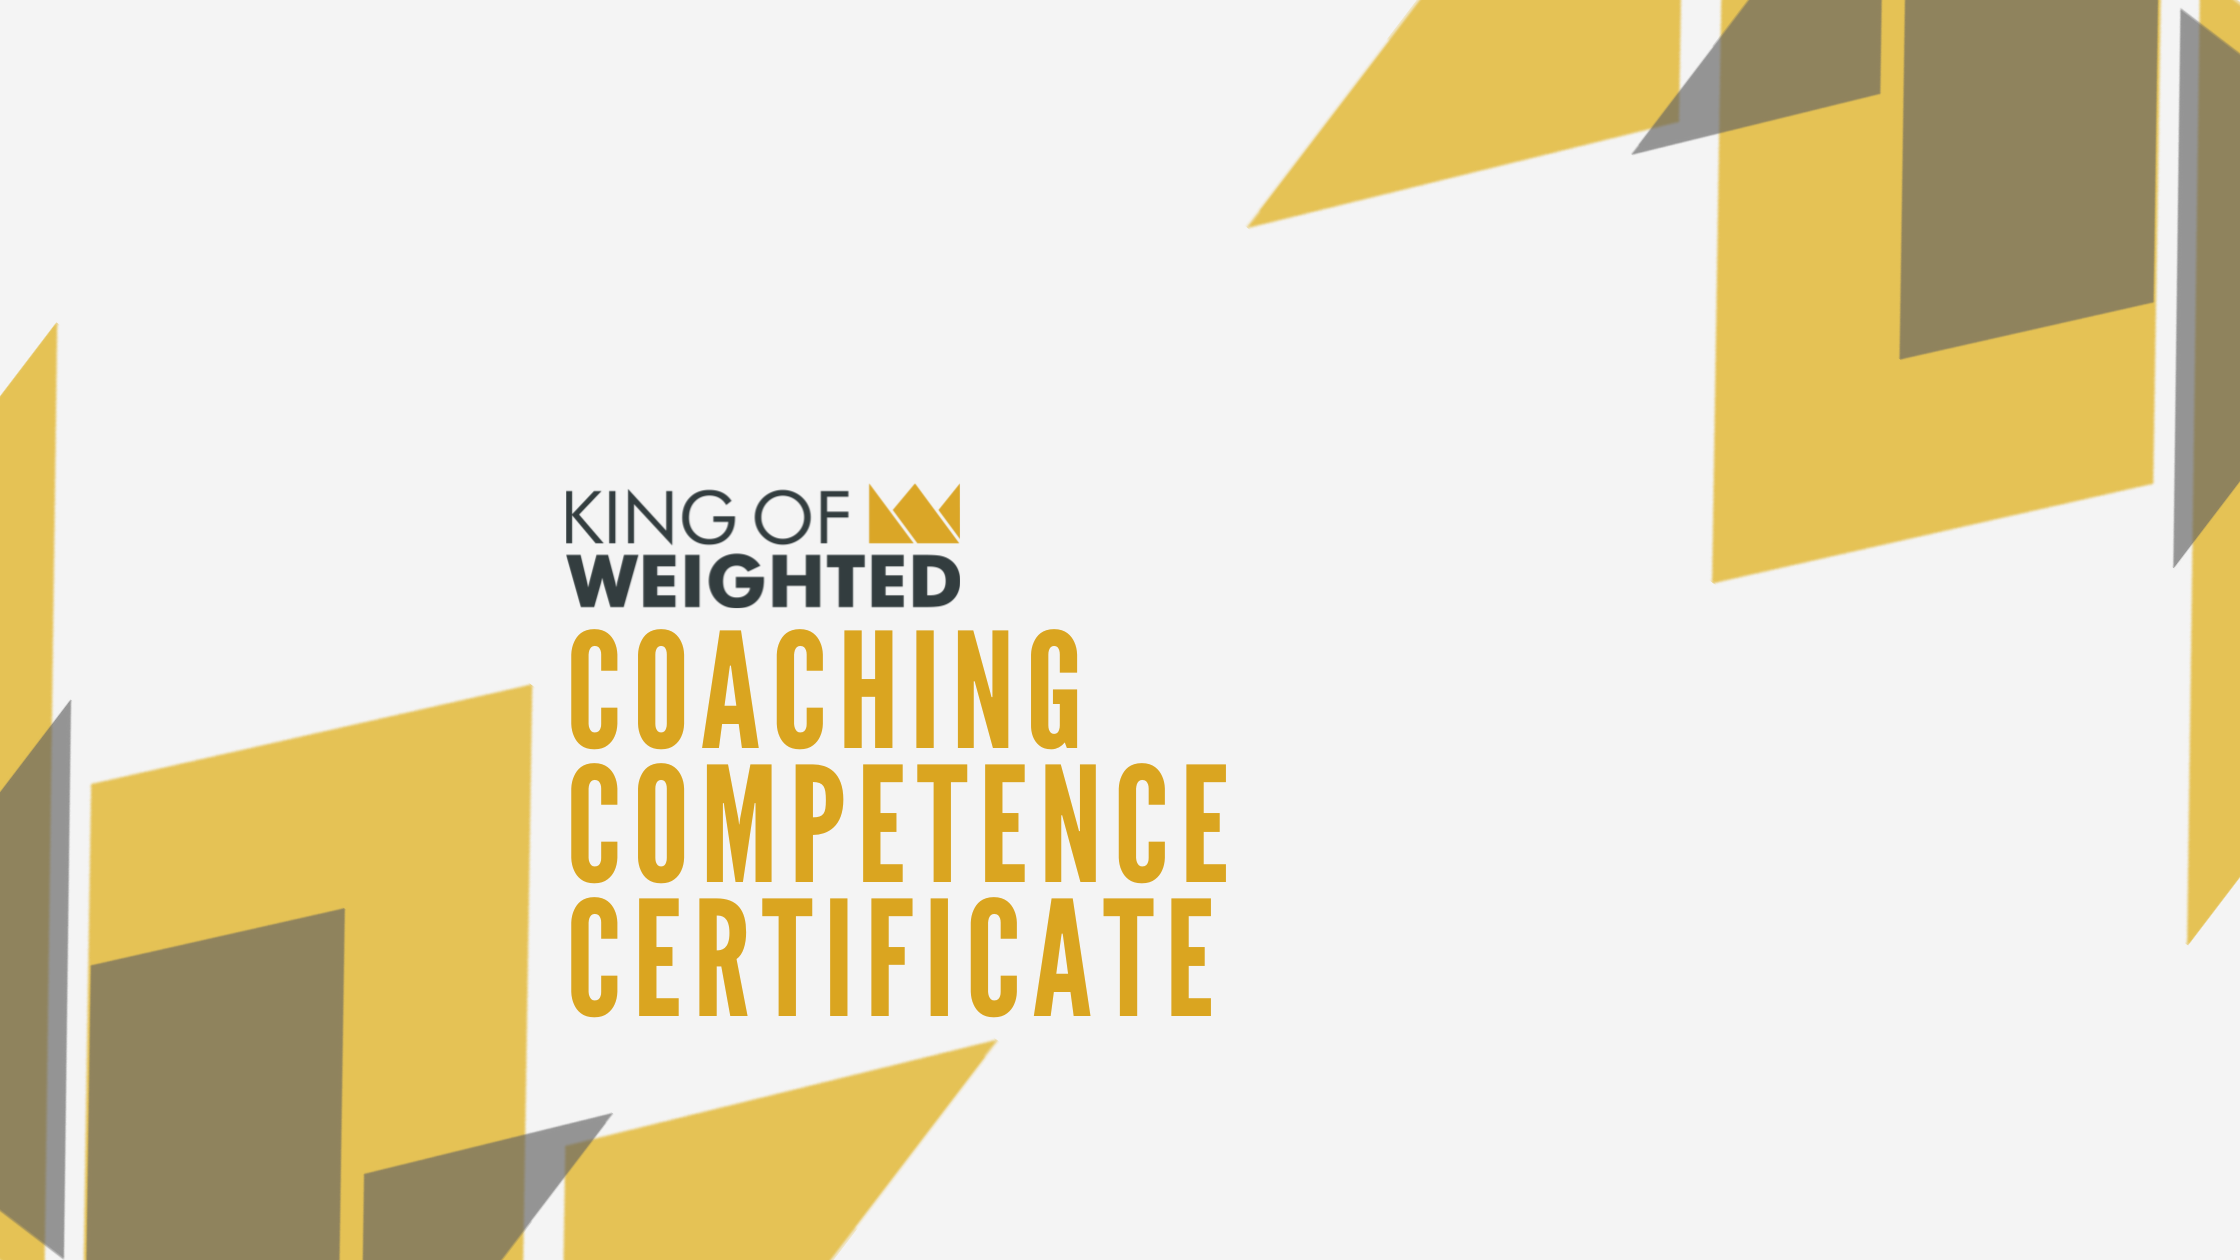 Coaching Competence Certificate